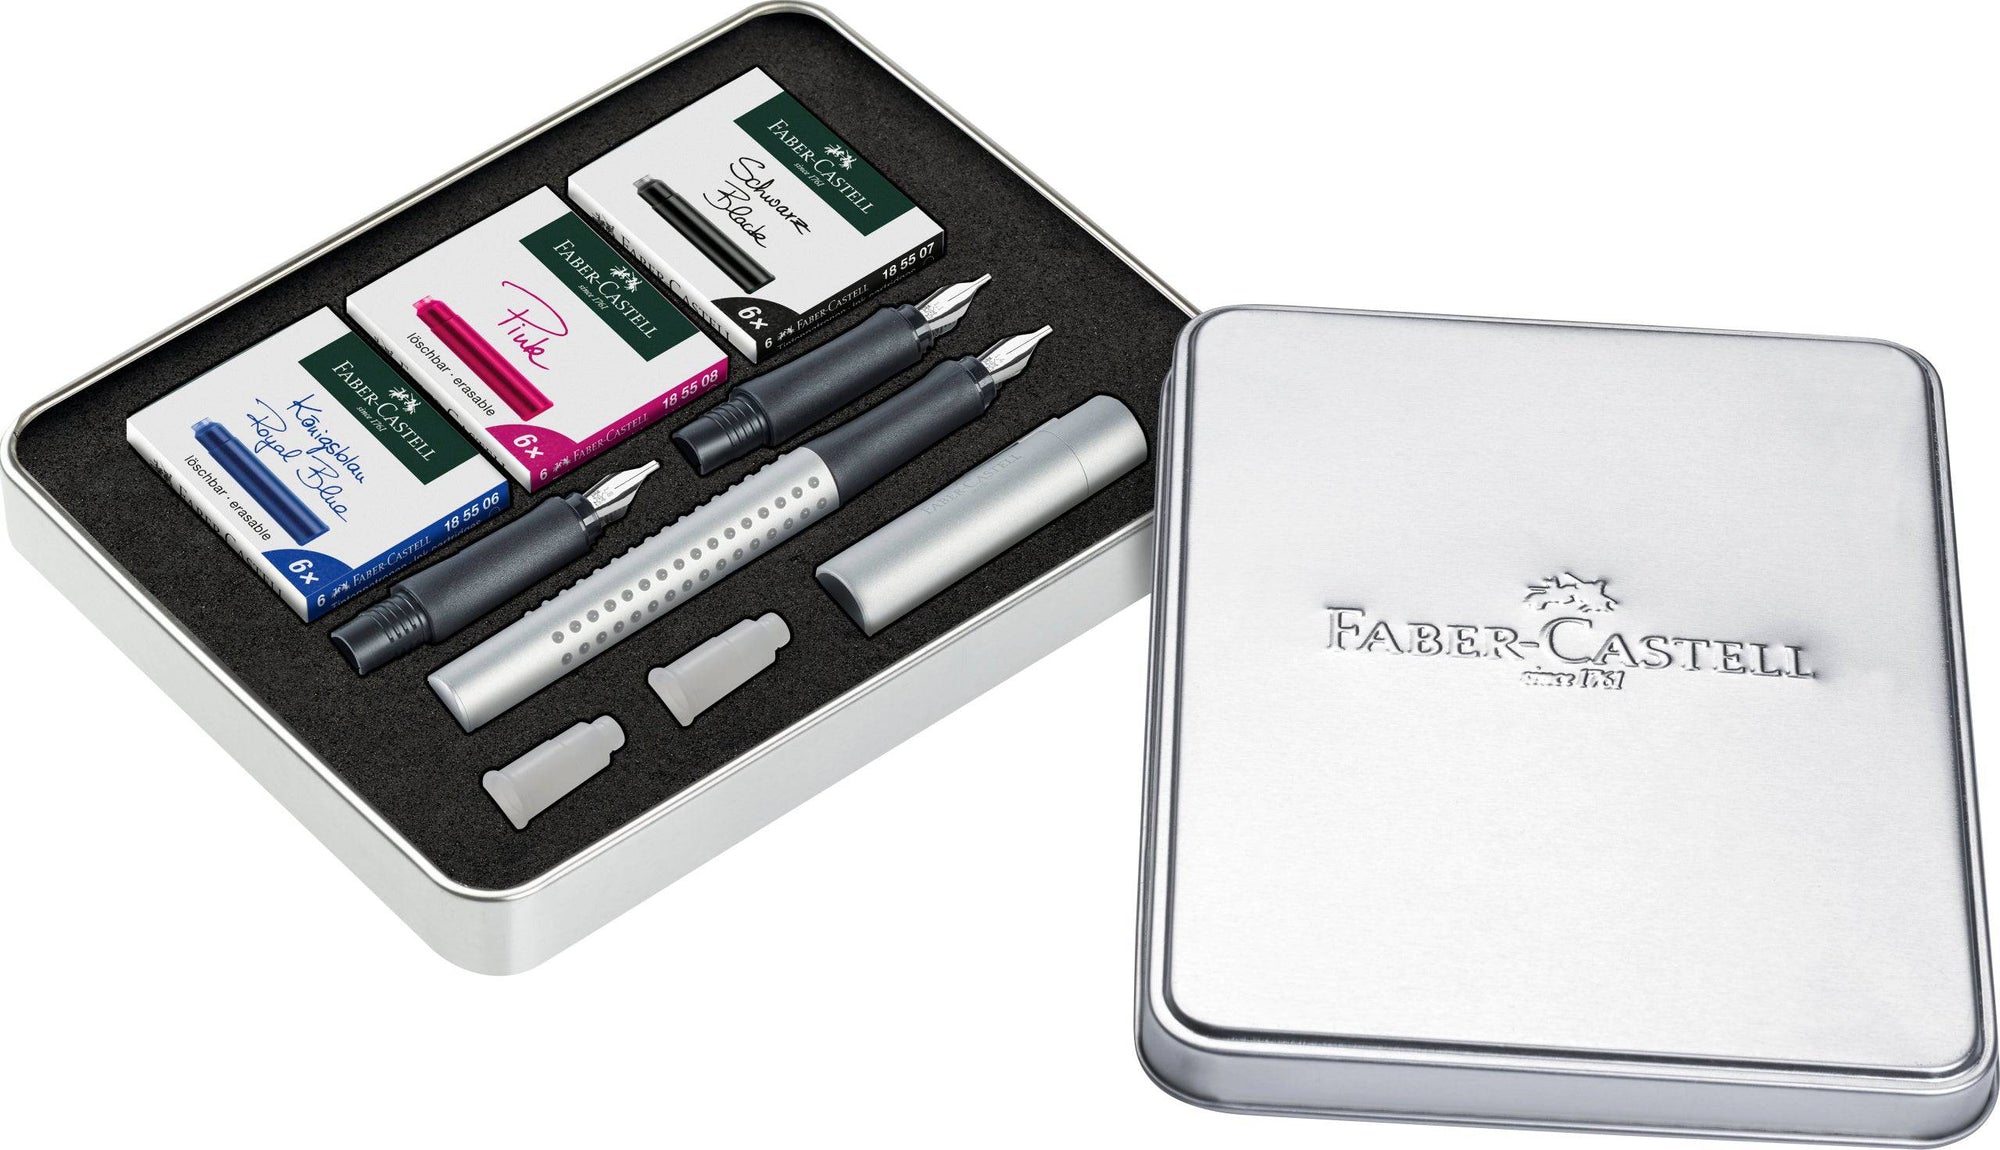 Faber-castell Grip 2011 Calligraphy Tin set - Blesket Canada